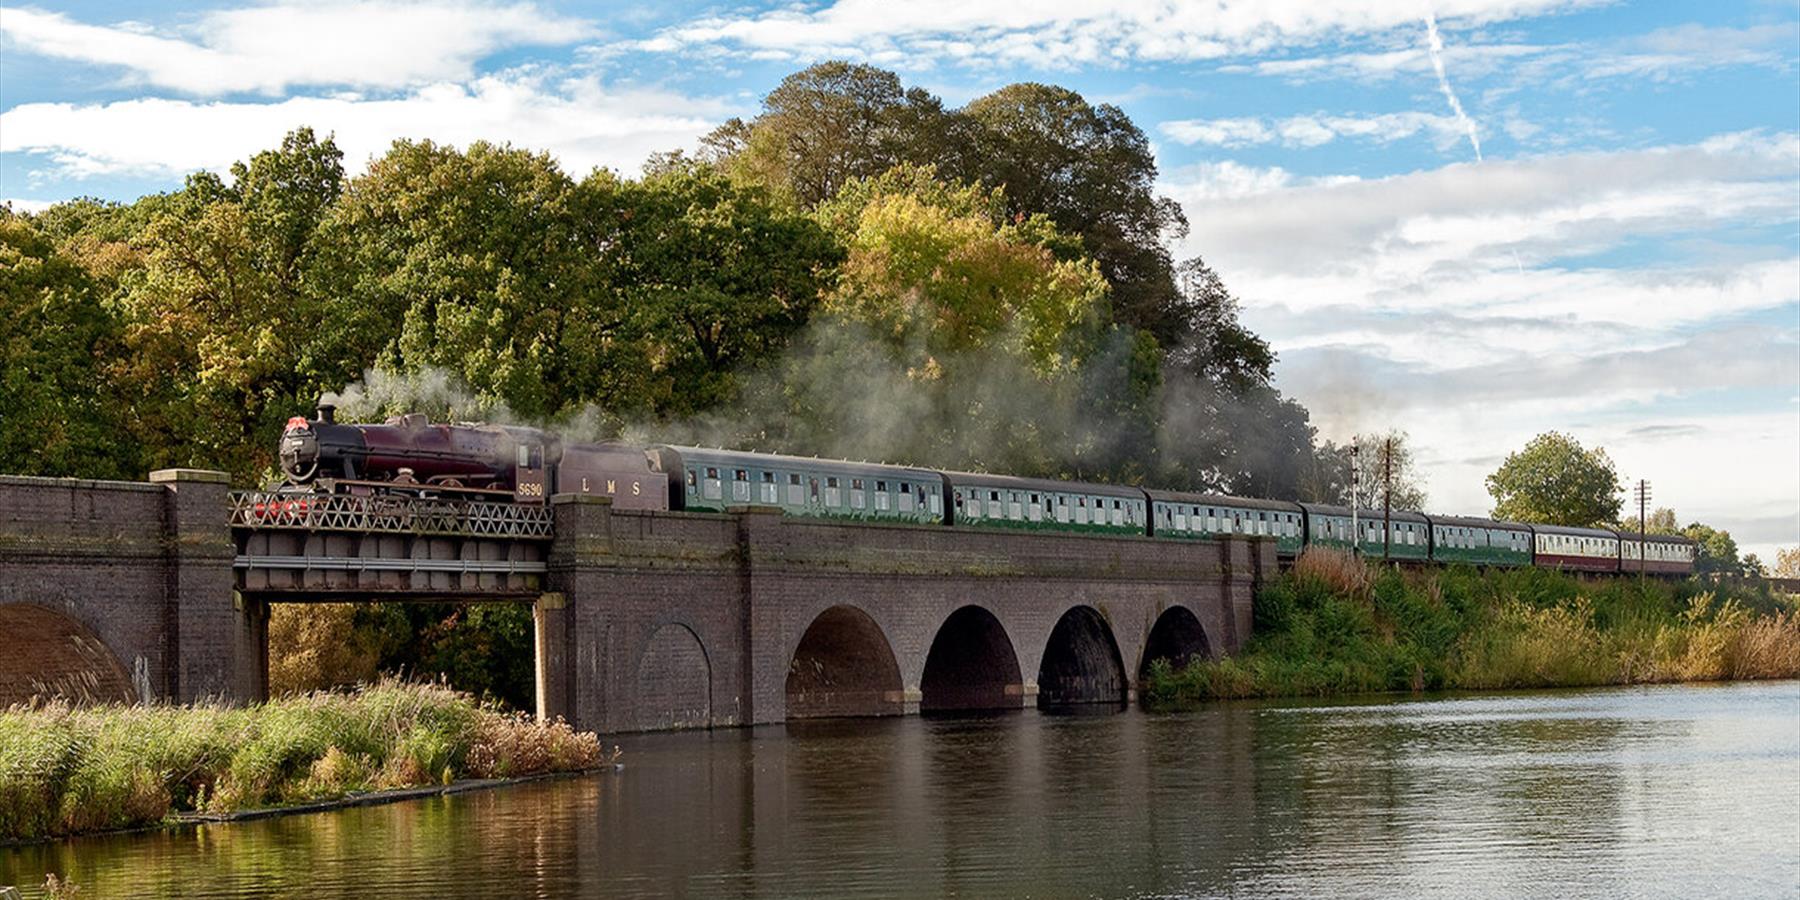 Step Back in Time and Ride on the Great Central Railway